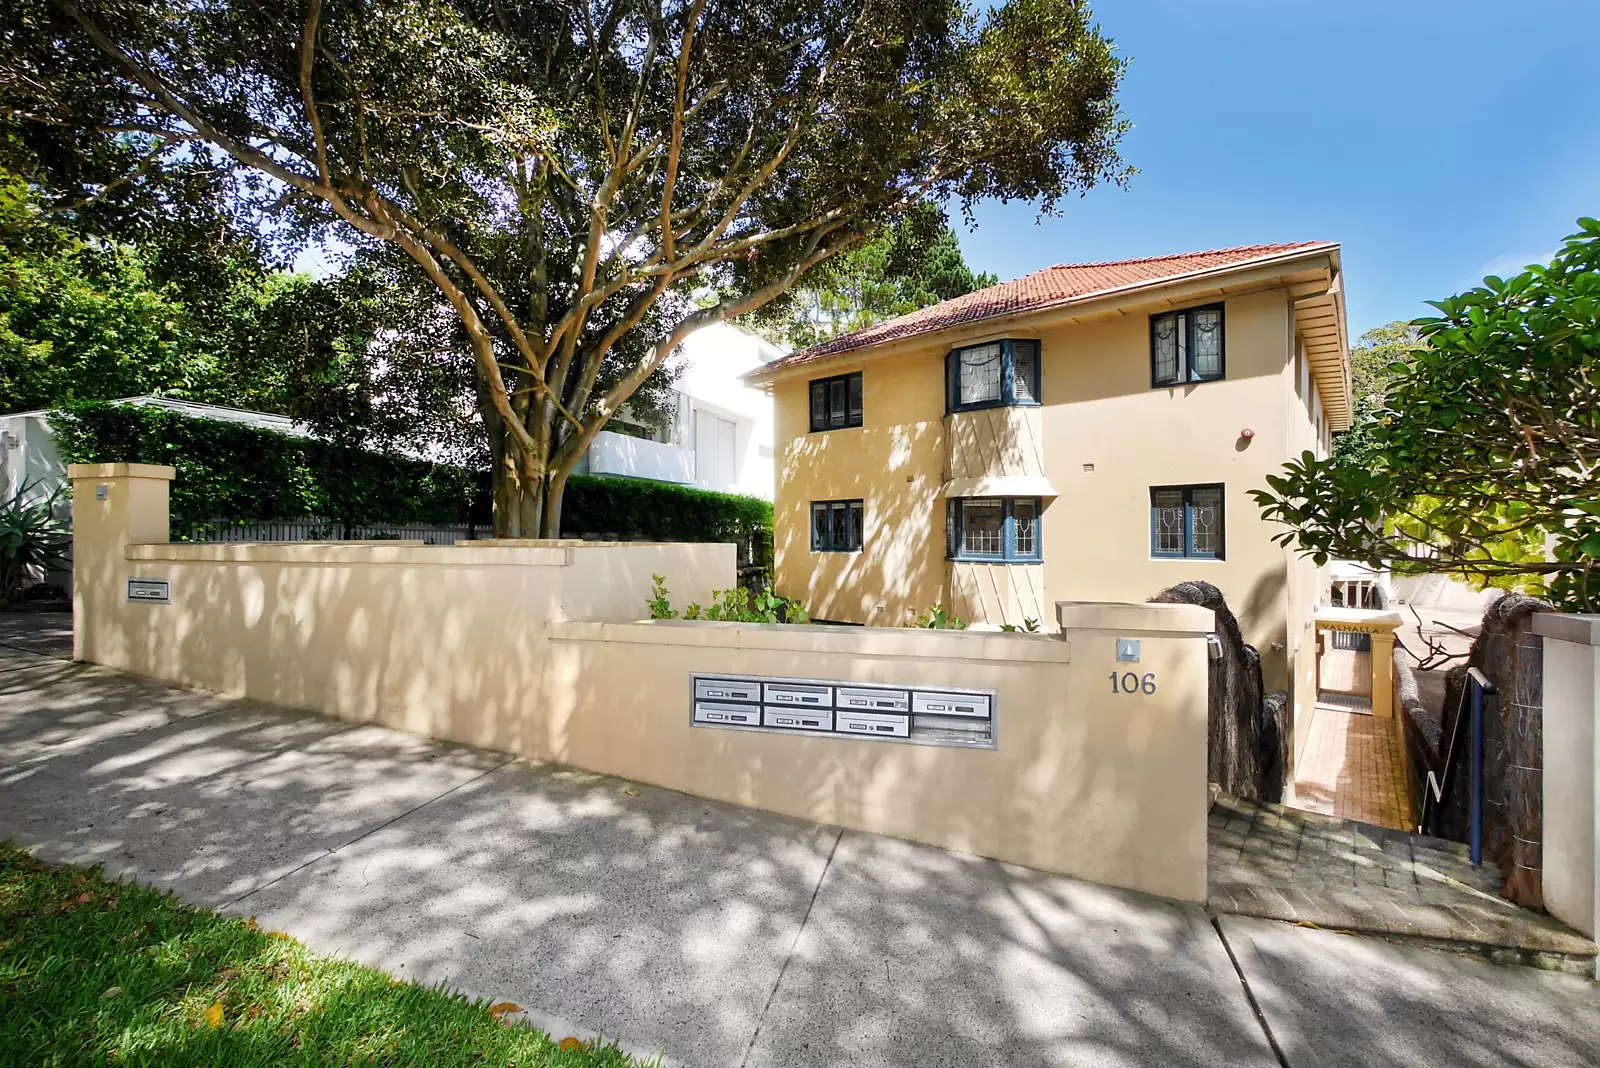 Photo #13: 6/106 Balfour Road, Bellevue Hill - Sold by Sydney Sotheby's International Realty